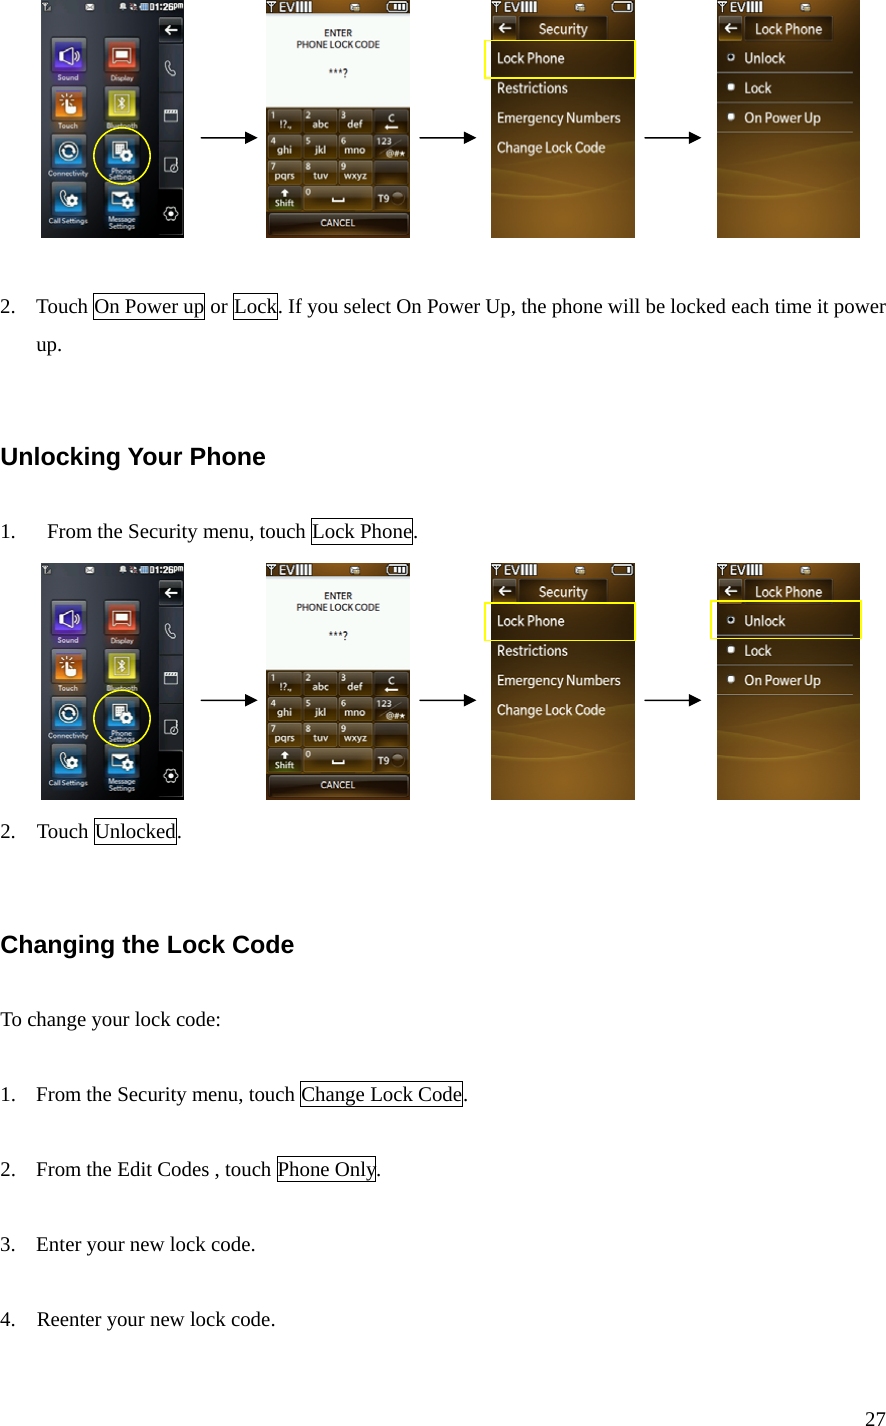 27                              2. Touch On Power up or Lock. If you select On Power Up, the phone will be locked each time it power up.   Unlocking Your Phone  1.      From the Security menu, touch Lock Phone.                             2.  Touch Unlocked.   Changing the Lock Code  To change your lock code:  1. From the Security menu, touch Change Lock Code.    2. From the Edit Codes , touch Phone Only.    3. Enter your new lock code.  4.    Reenter your new lock code. 